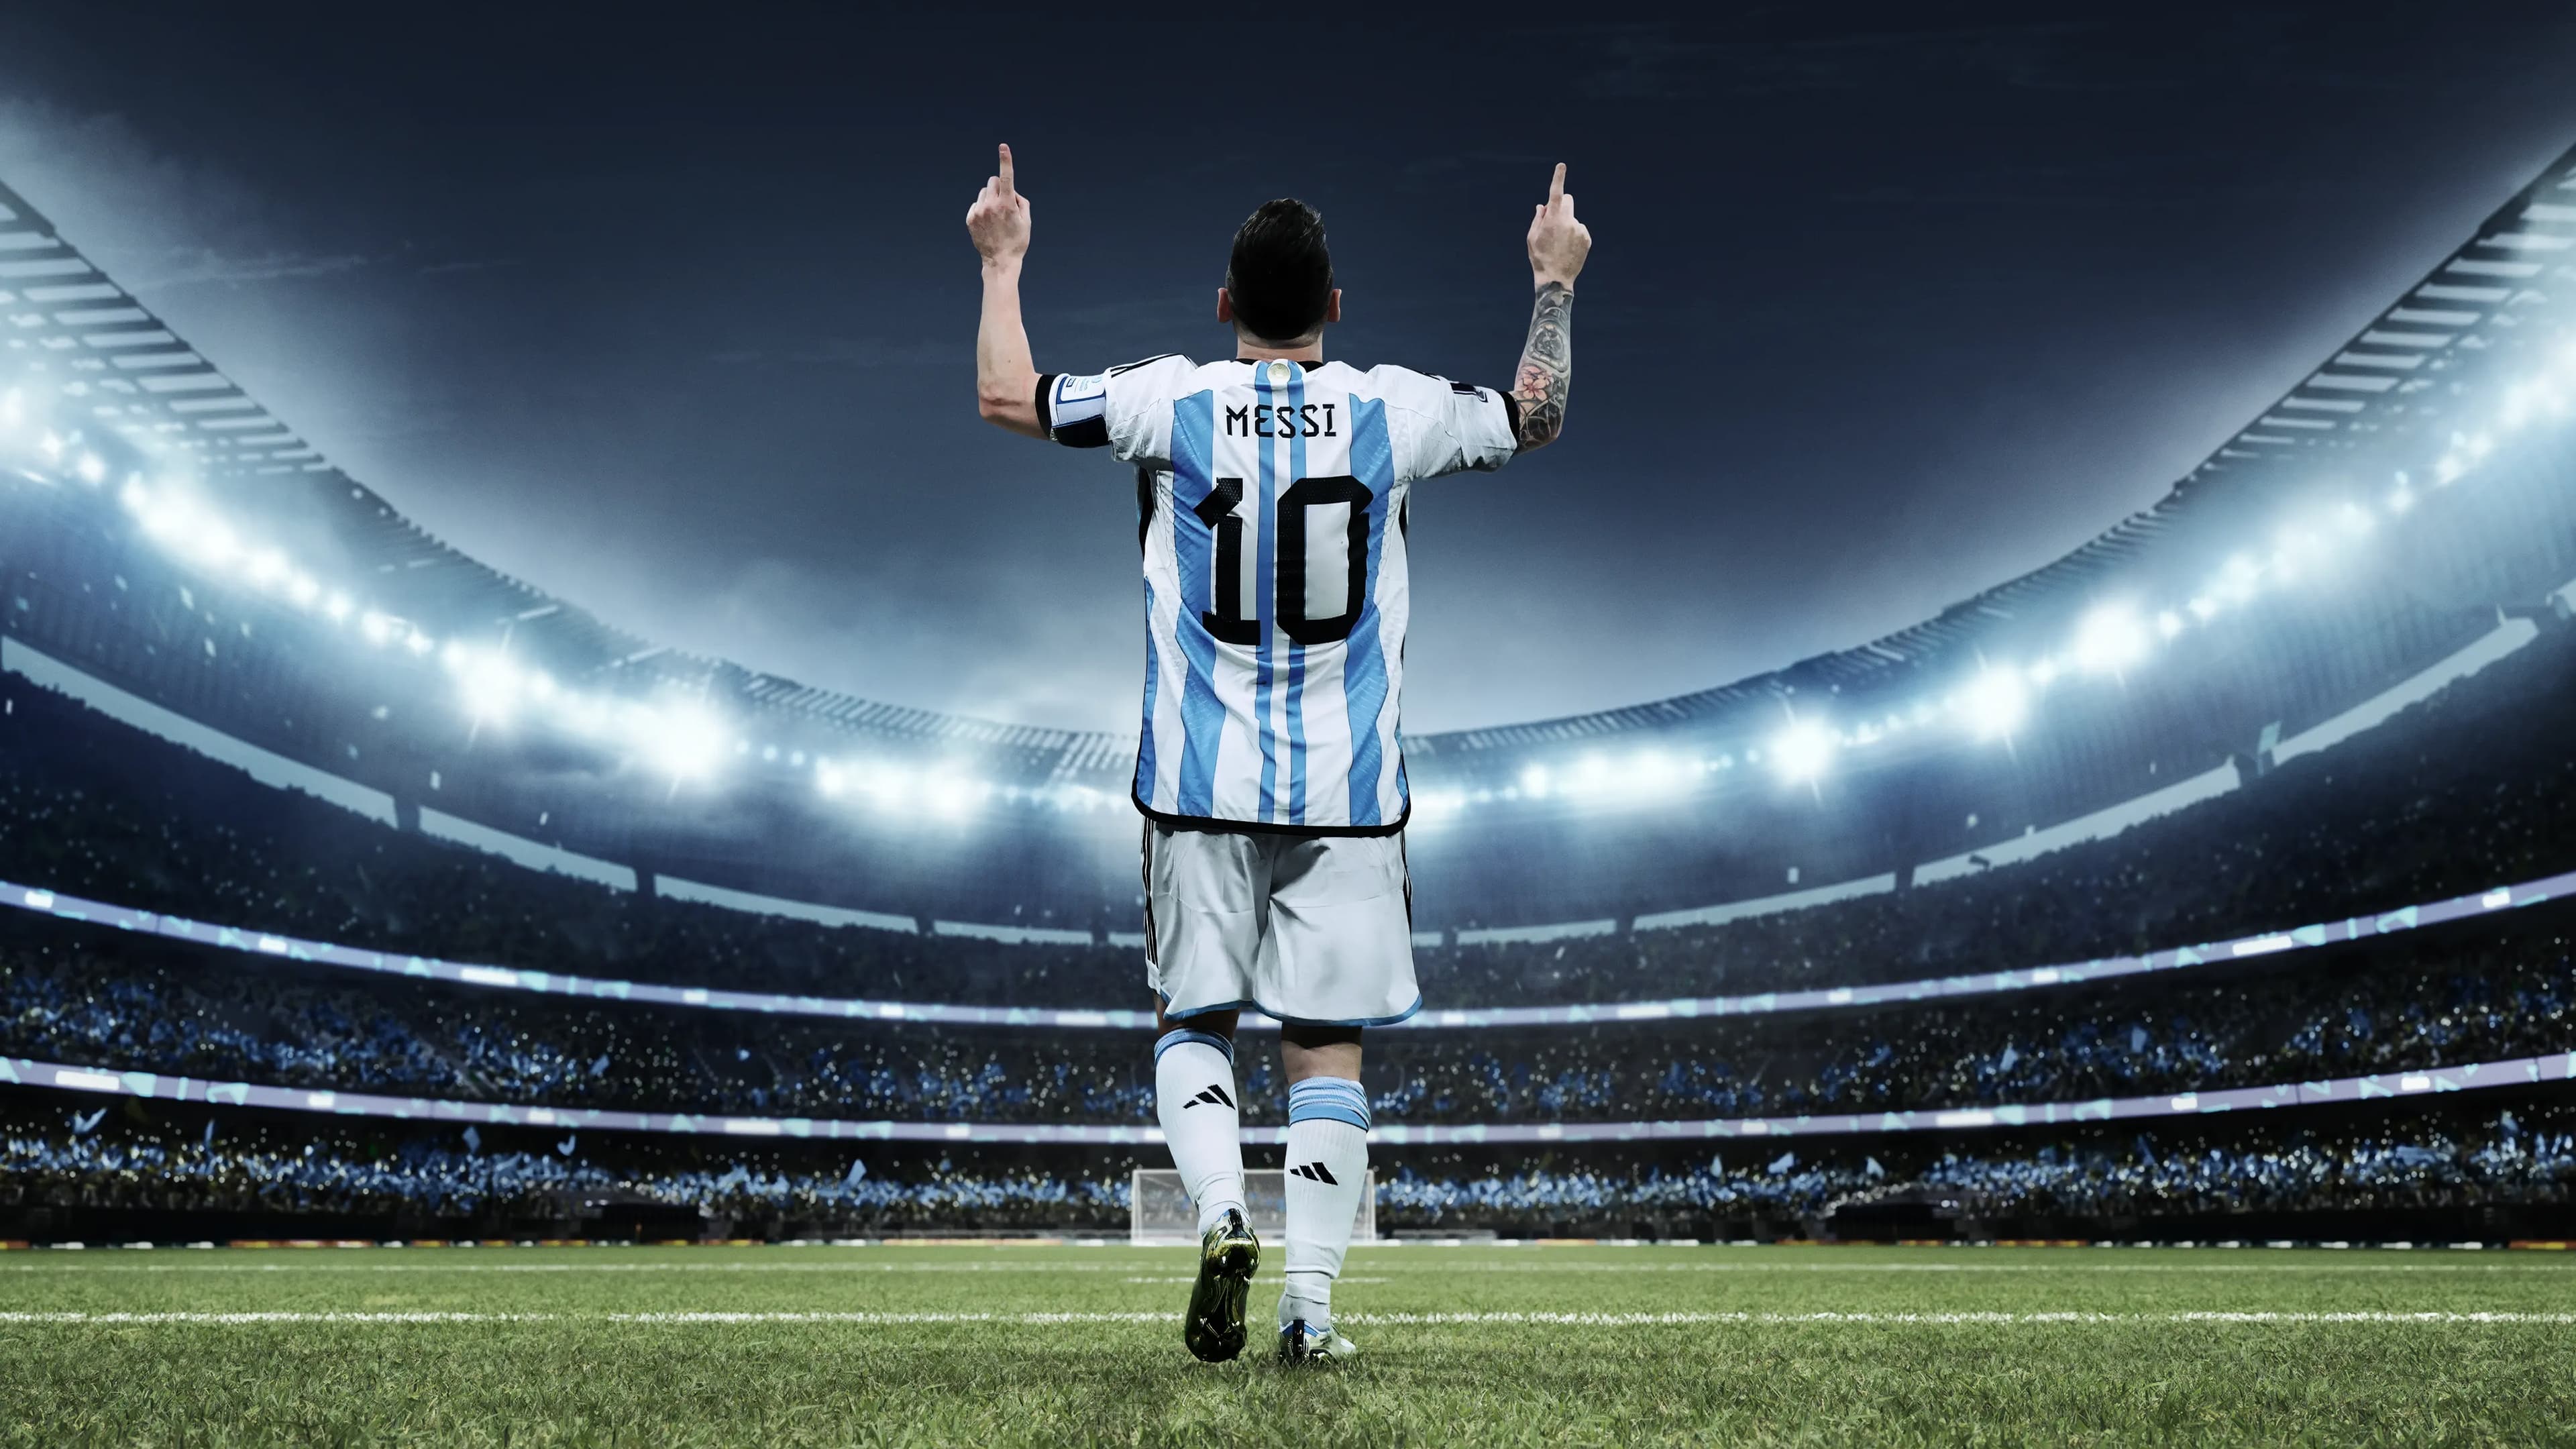 Watch Messi's World Cup: The Rise of a Legend Online